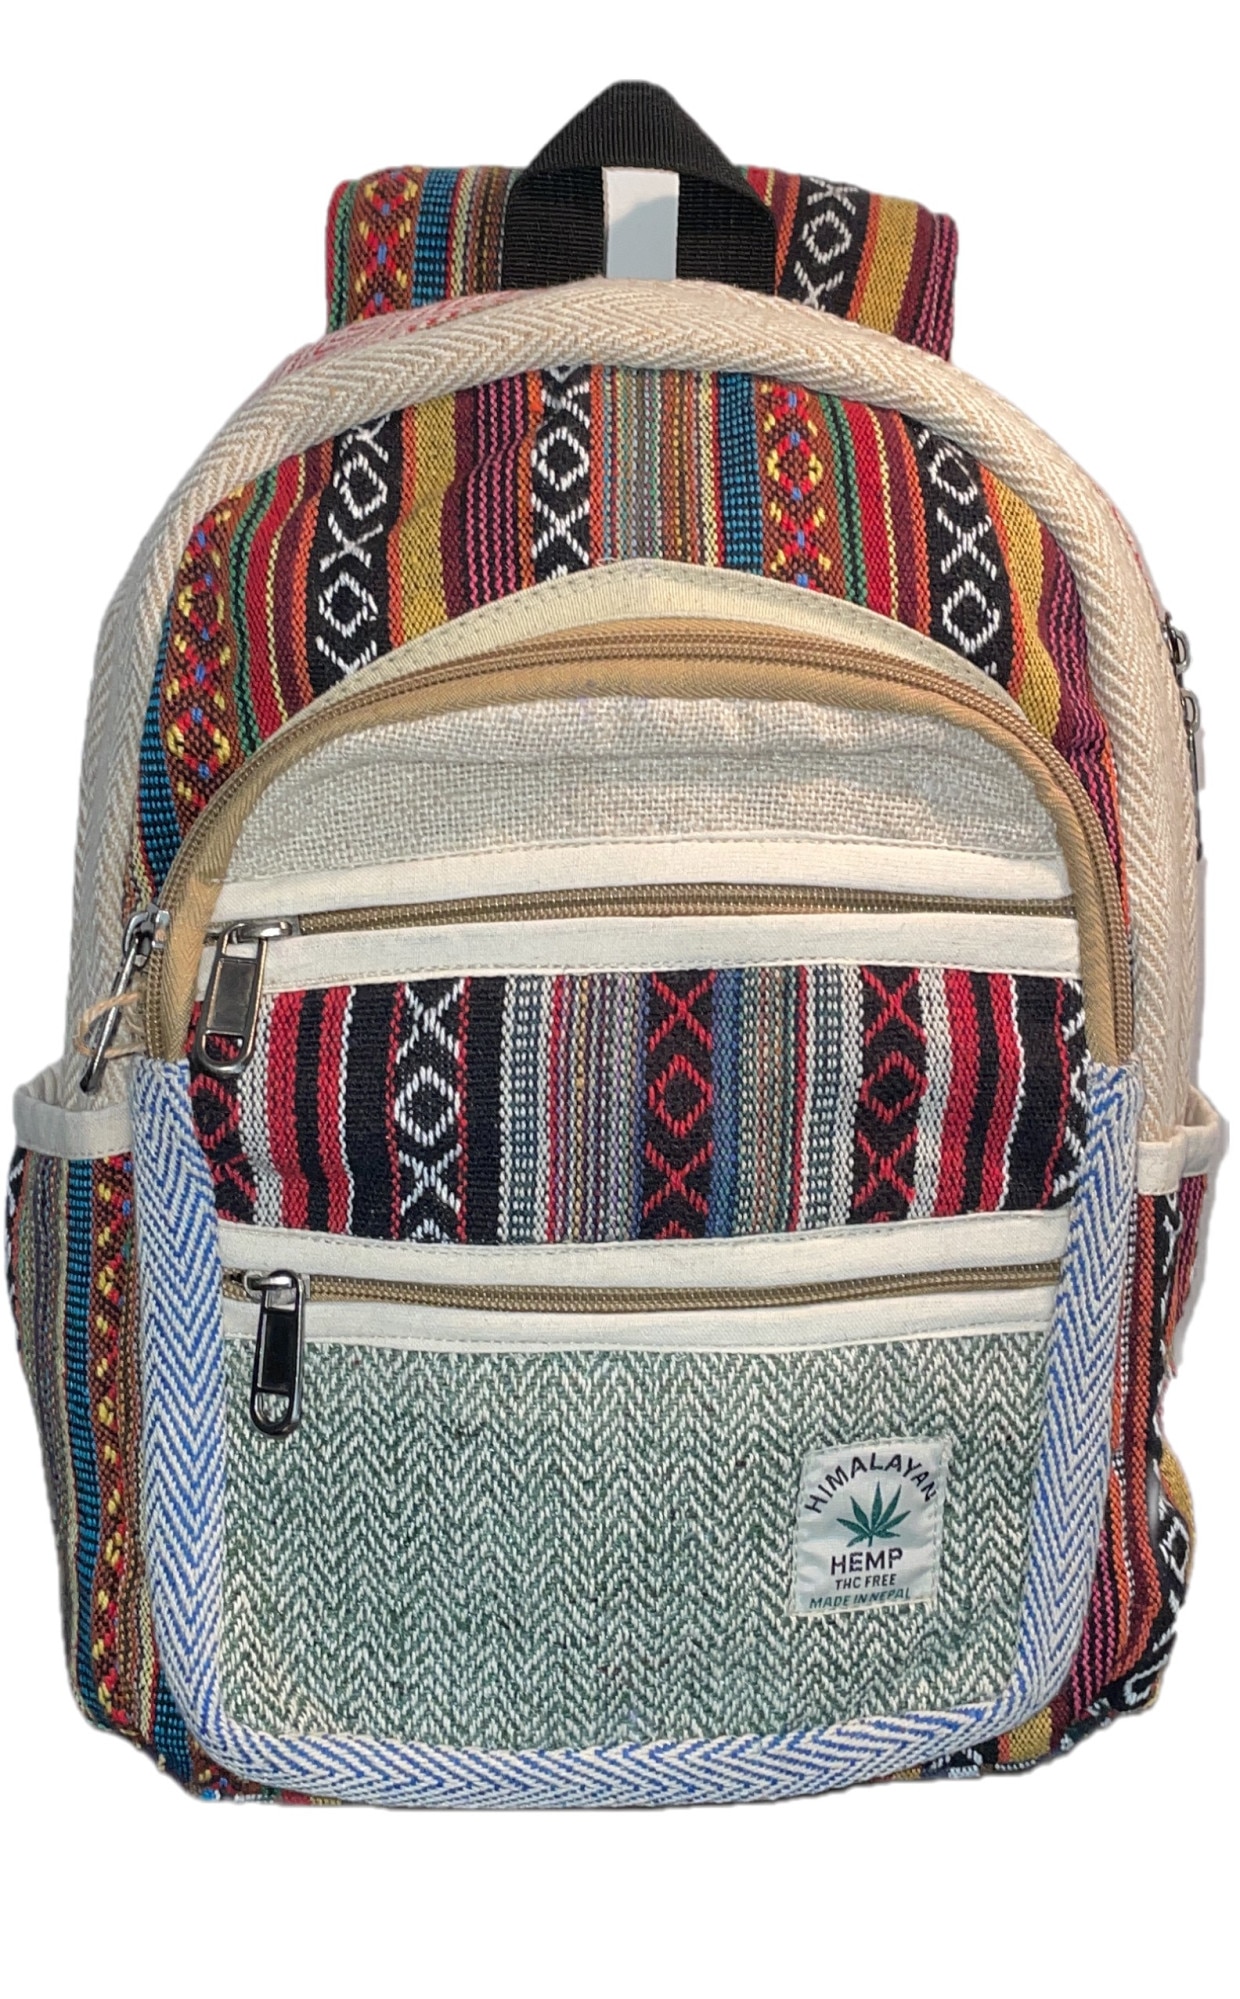 See you recommend Inaccessible Rucsac Hippie, handmade, canepa si bumbac, multicolor, unisex, 34 x 25 x  9.5 cm - eMAG.ro